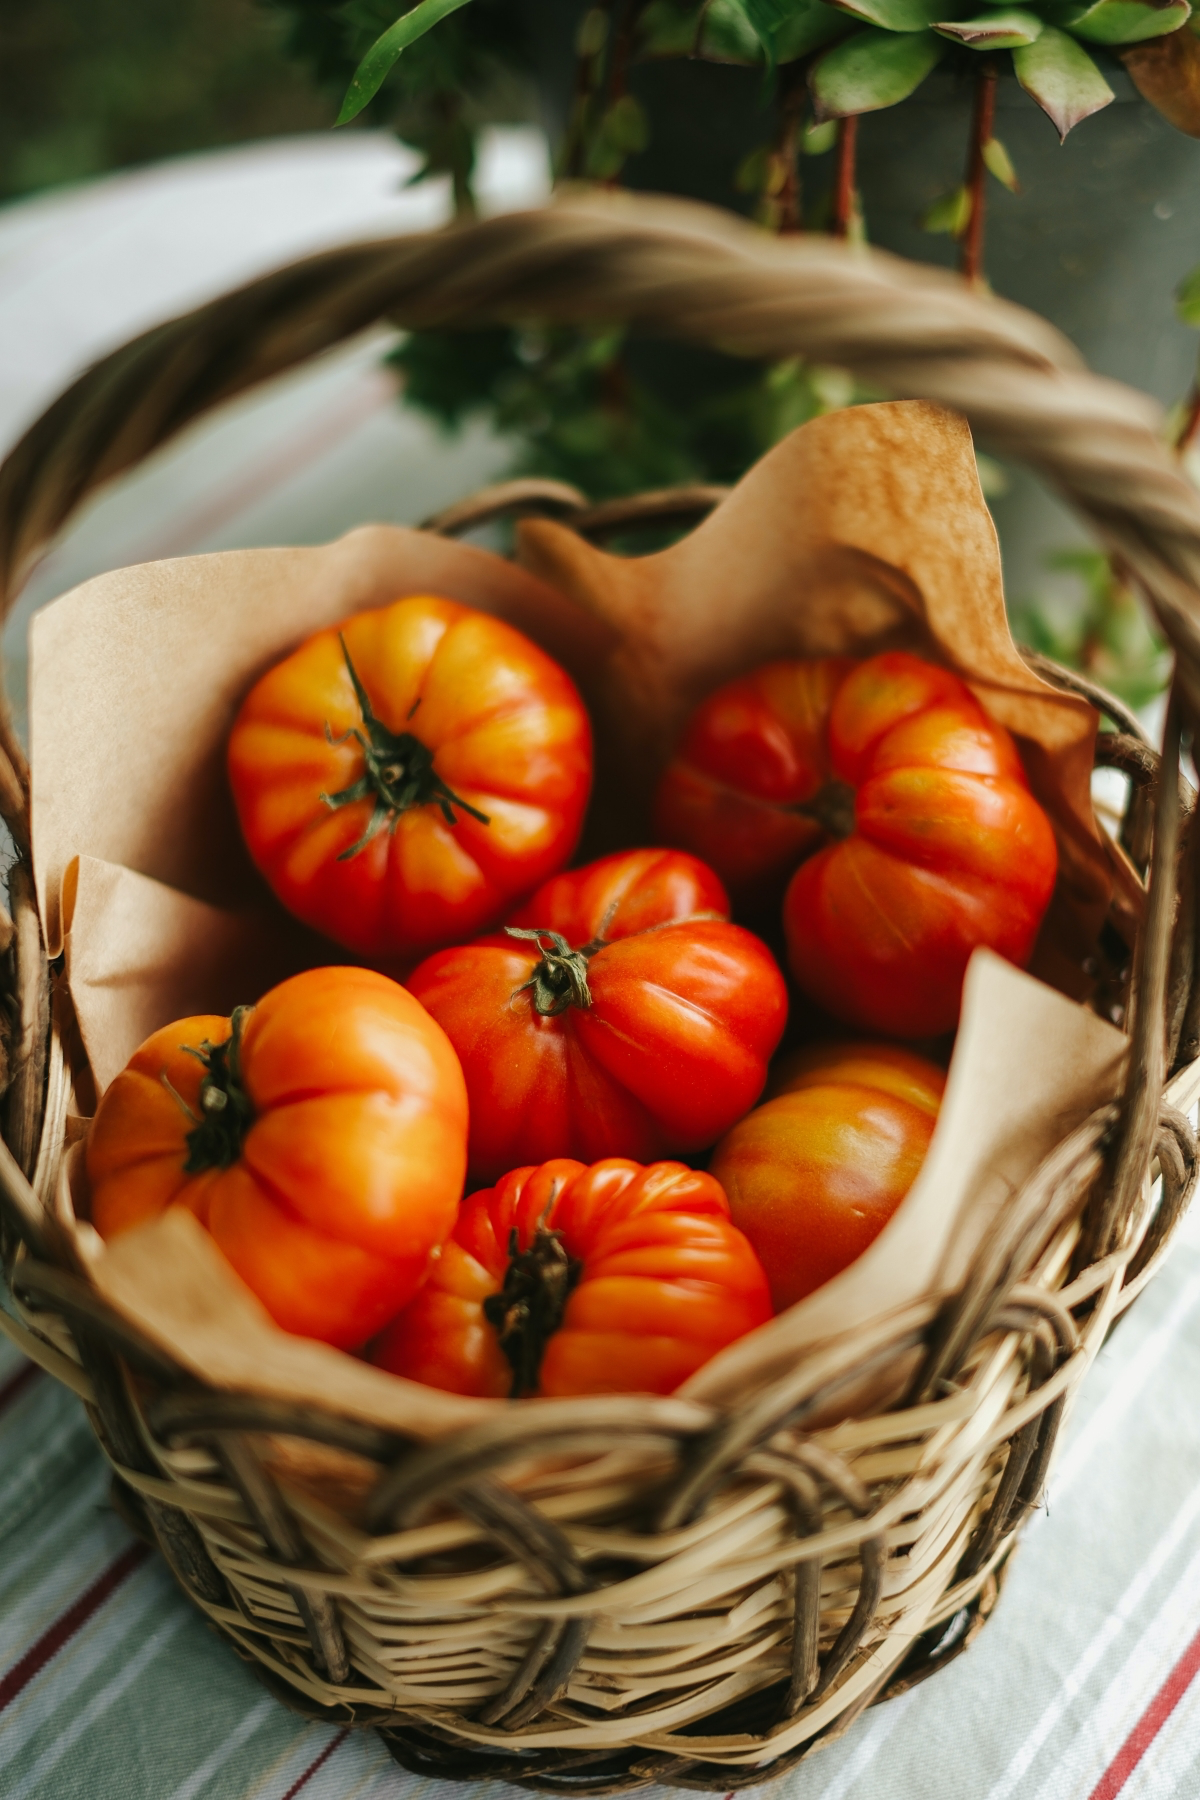 what health benefits does tomatoes have